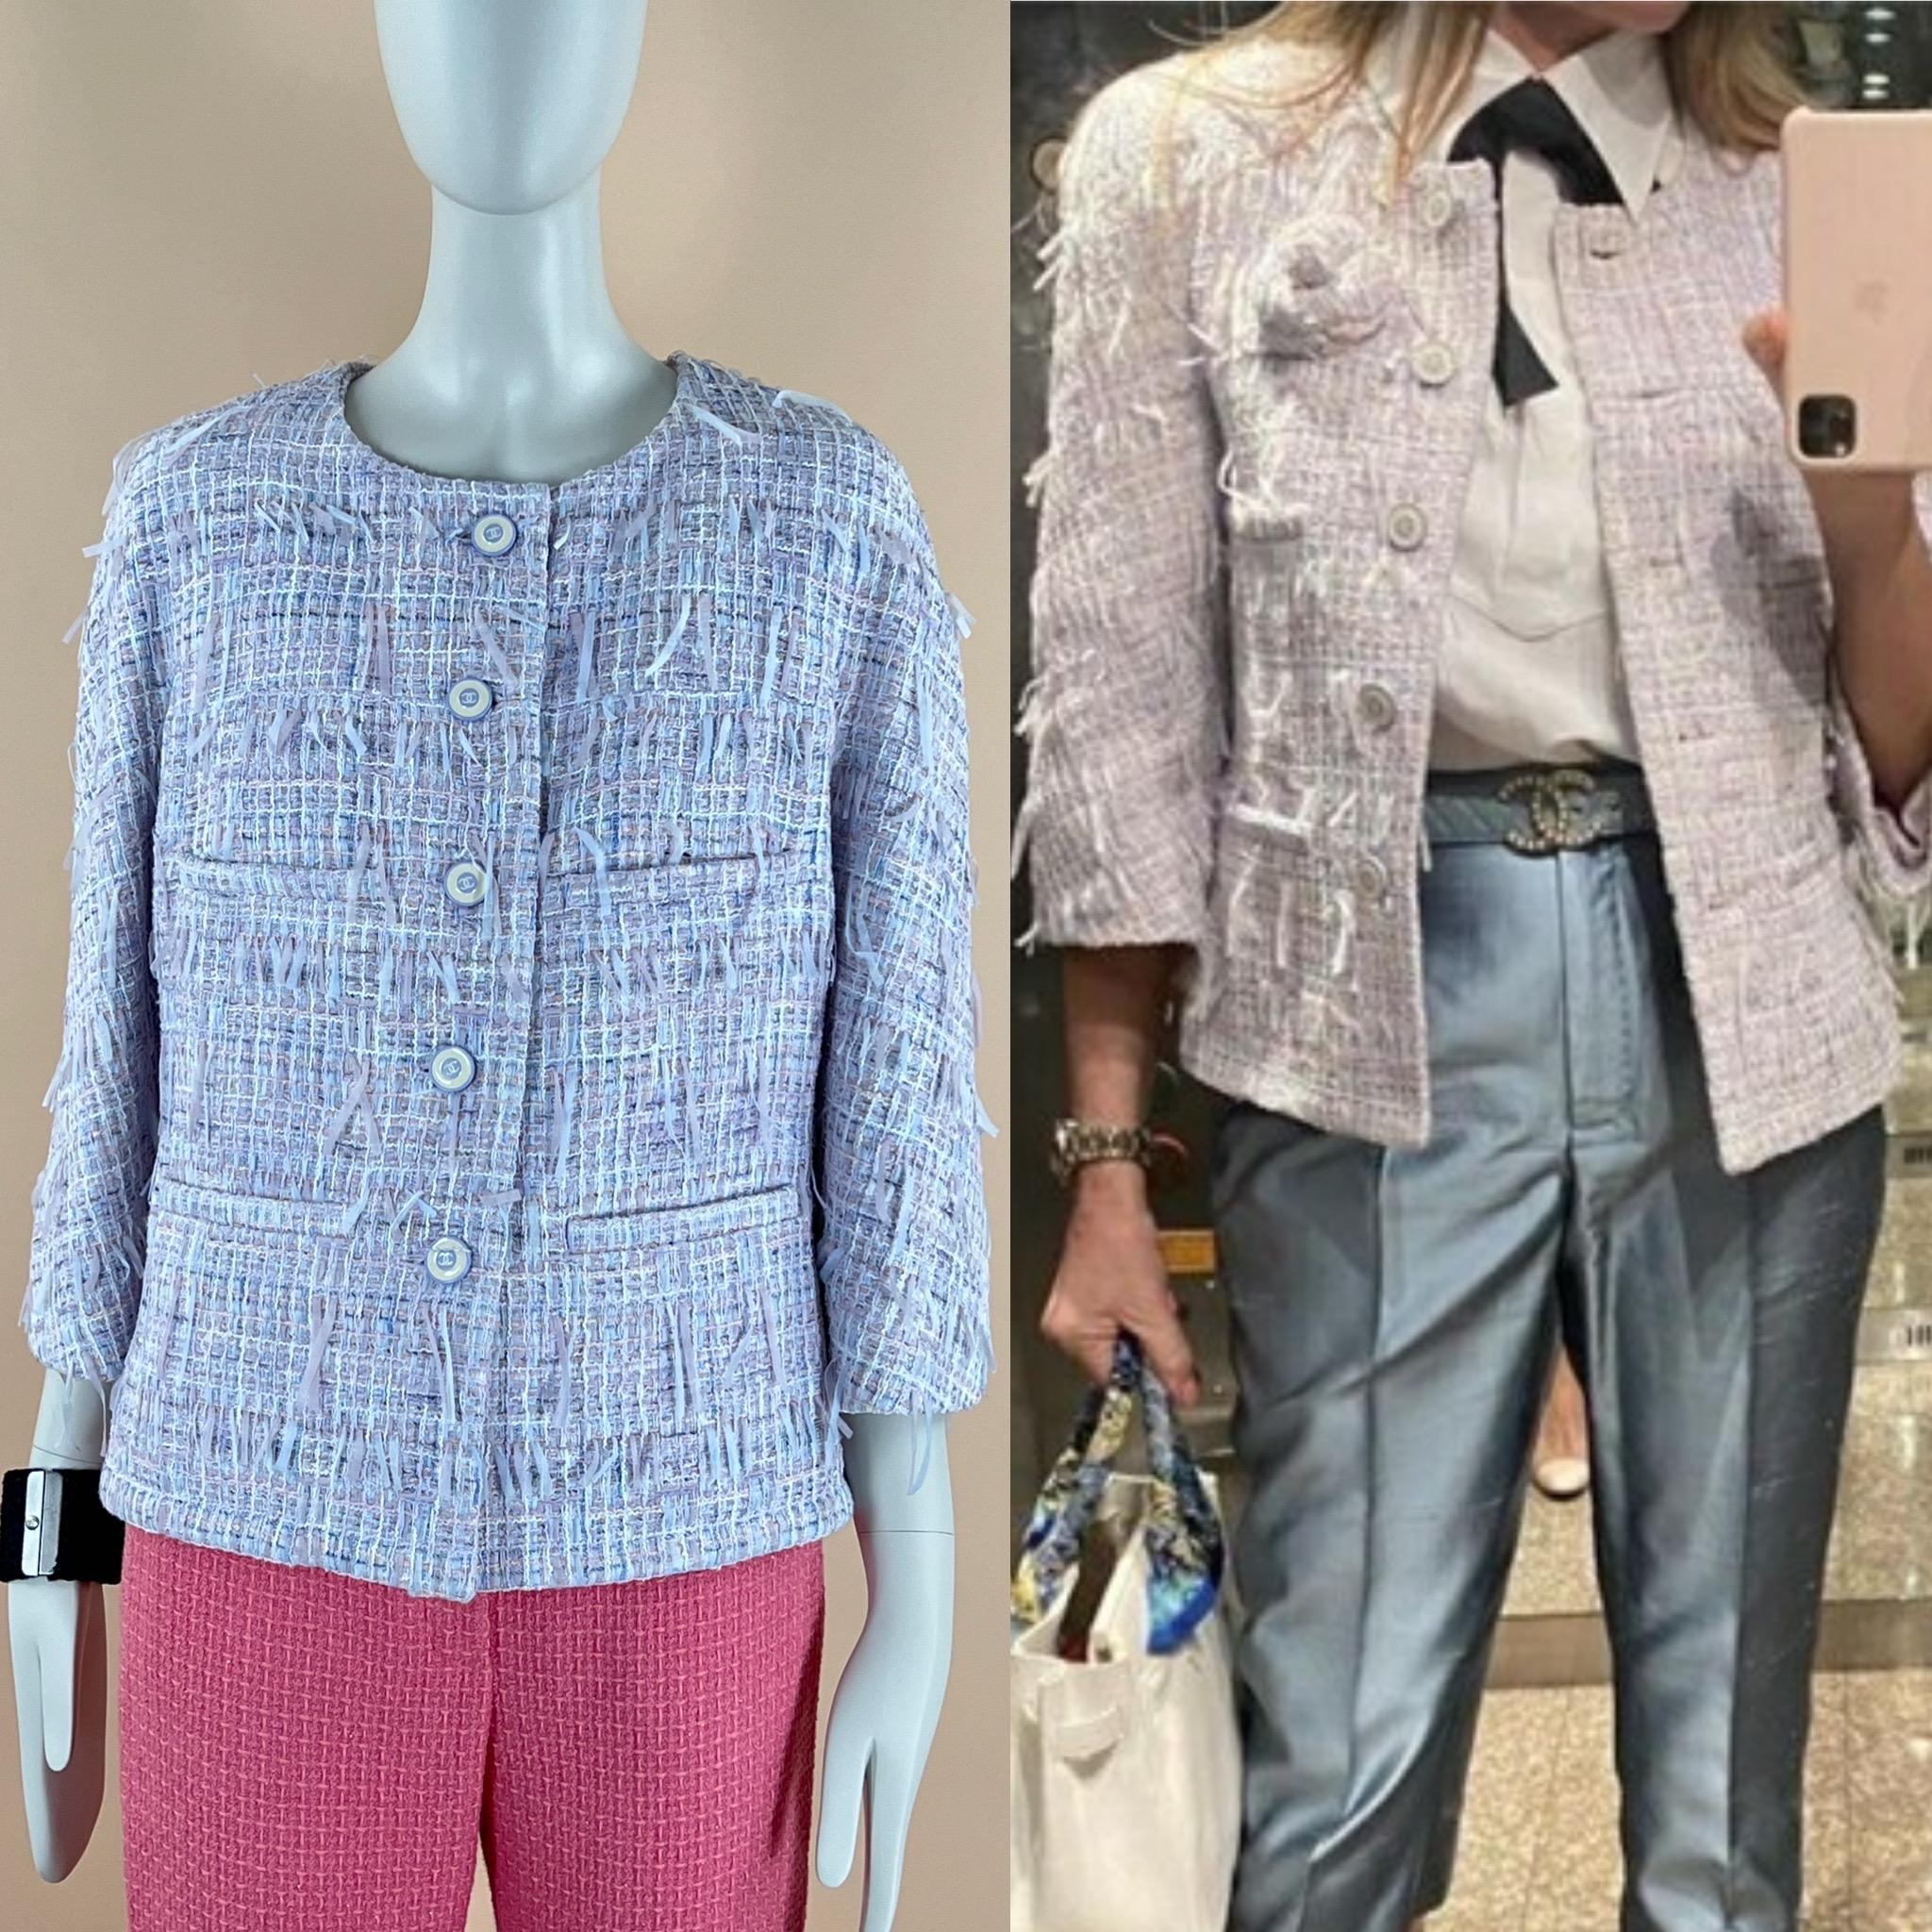 New Chanel 18P lavender tweed jacket from 2018 Spring Collection by Karl Lagerfeld. Retail price ca. 8,900$
Very recognizable! as seen on many celebs and fashionistas.
- made of luxurious fringed lesage tweed in pastel lavender color
- CC lof